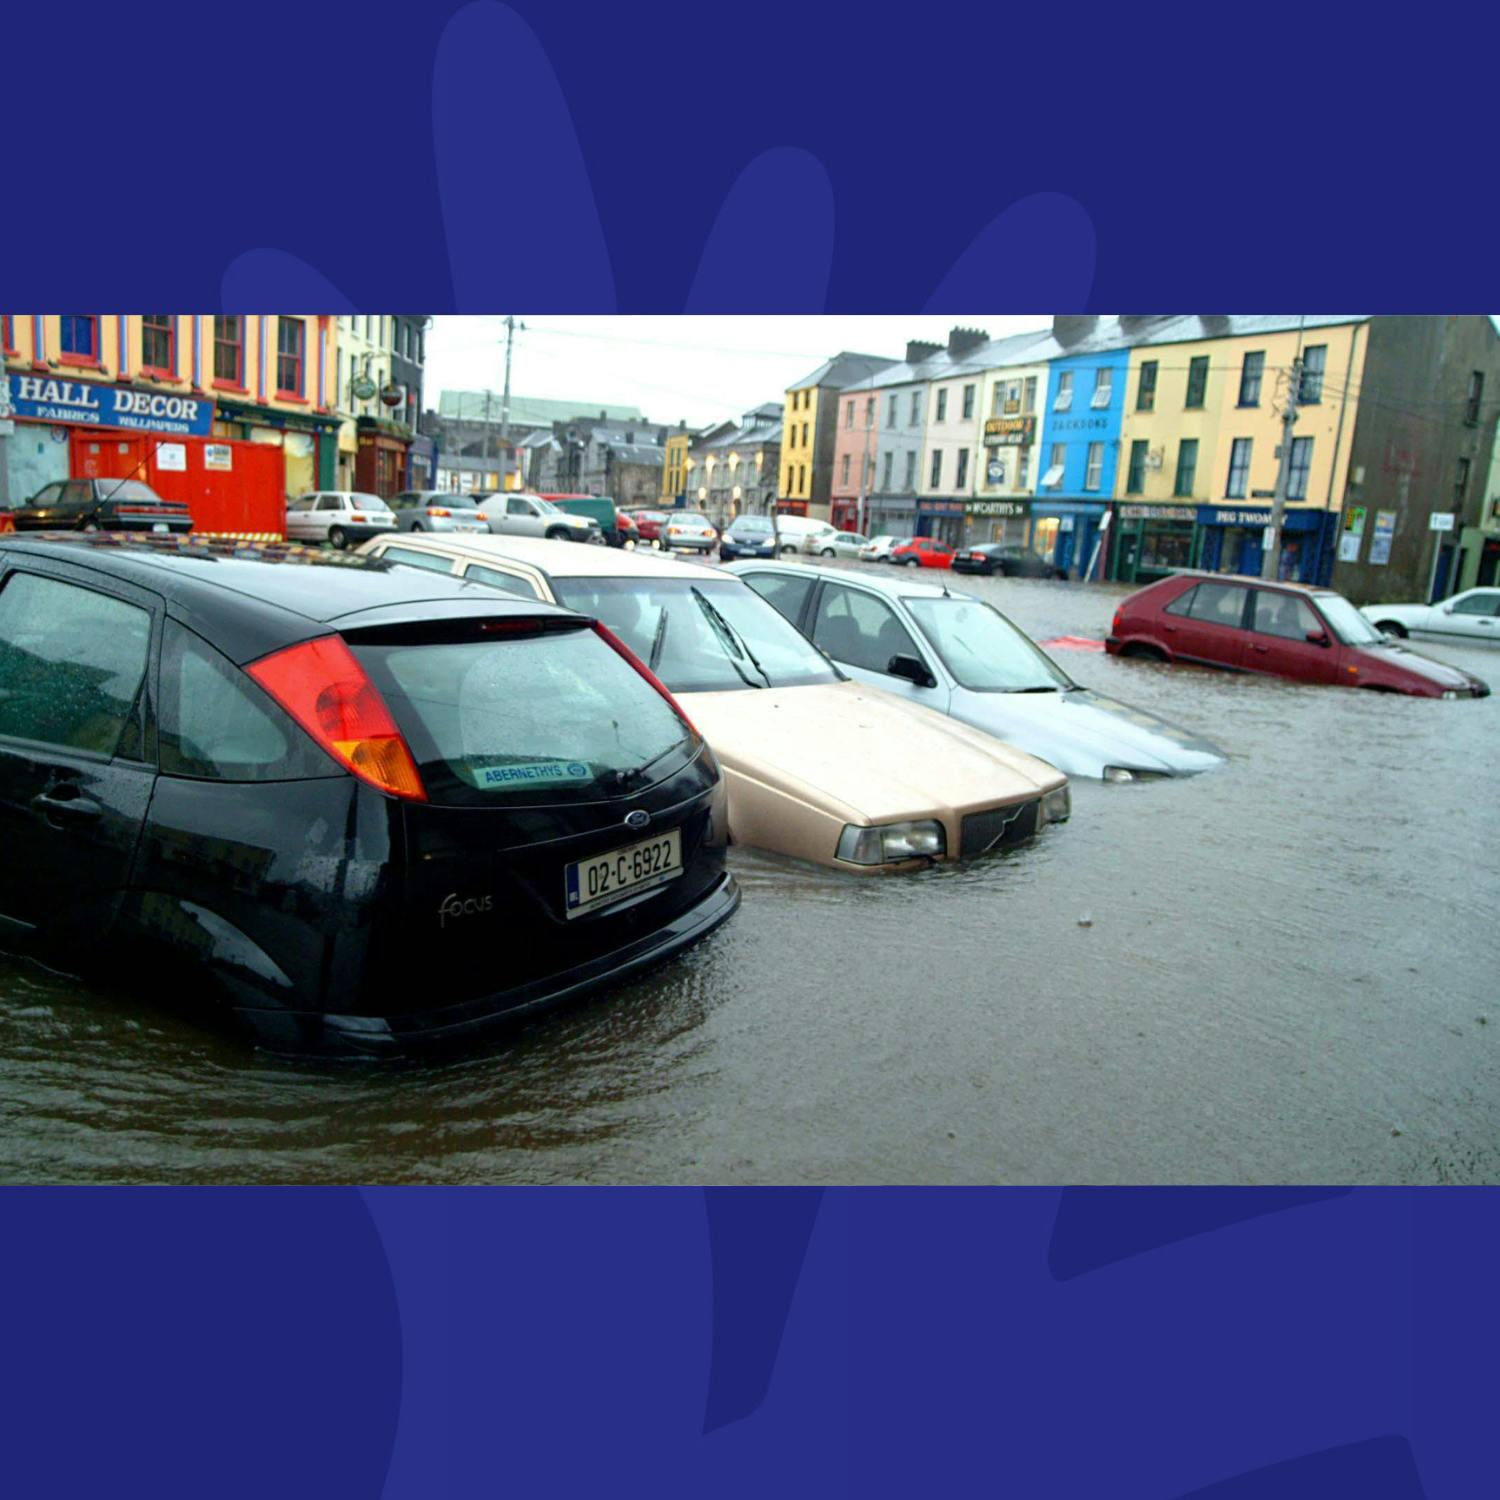 Events Like The Cork Floods Are With Us To Stay